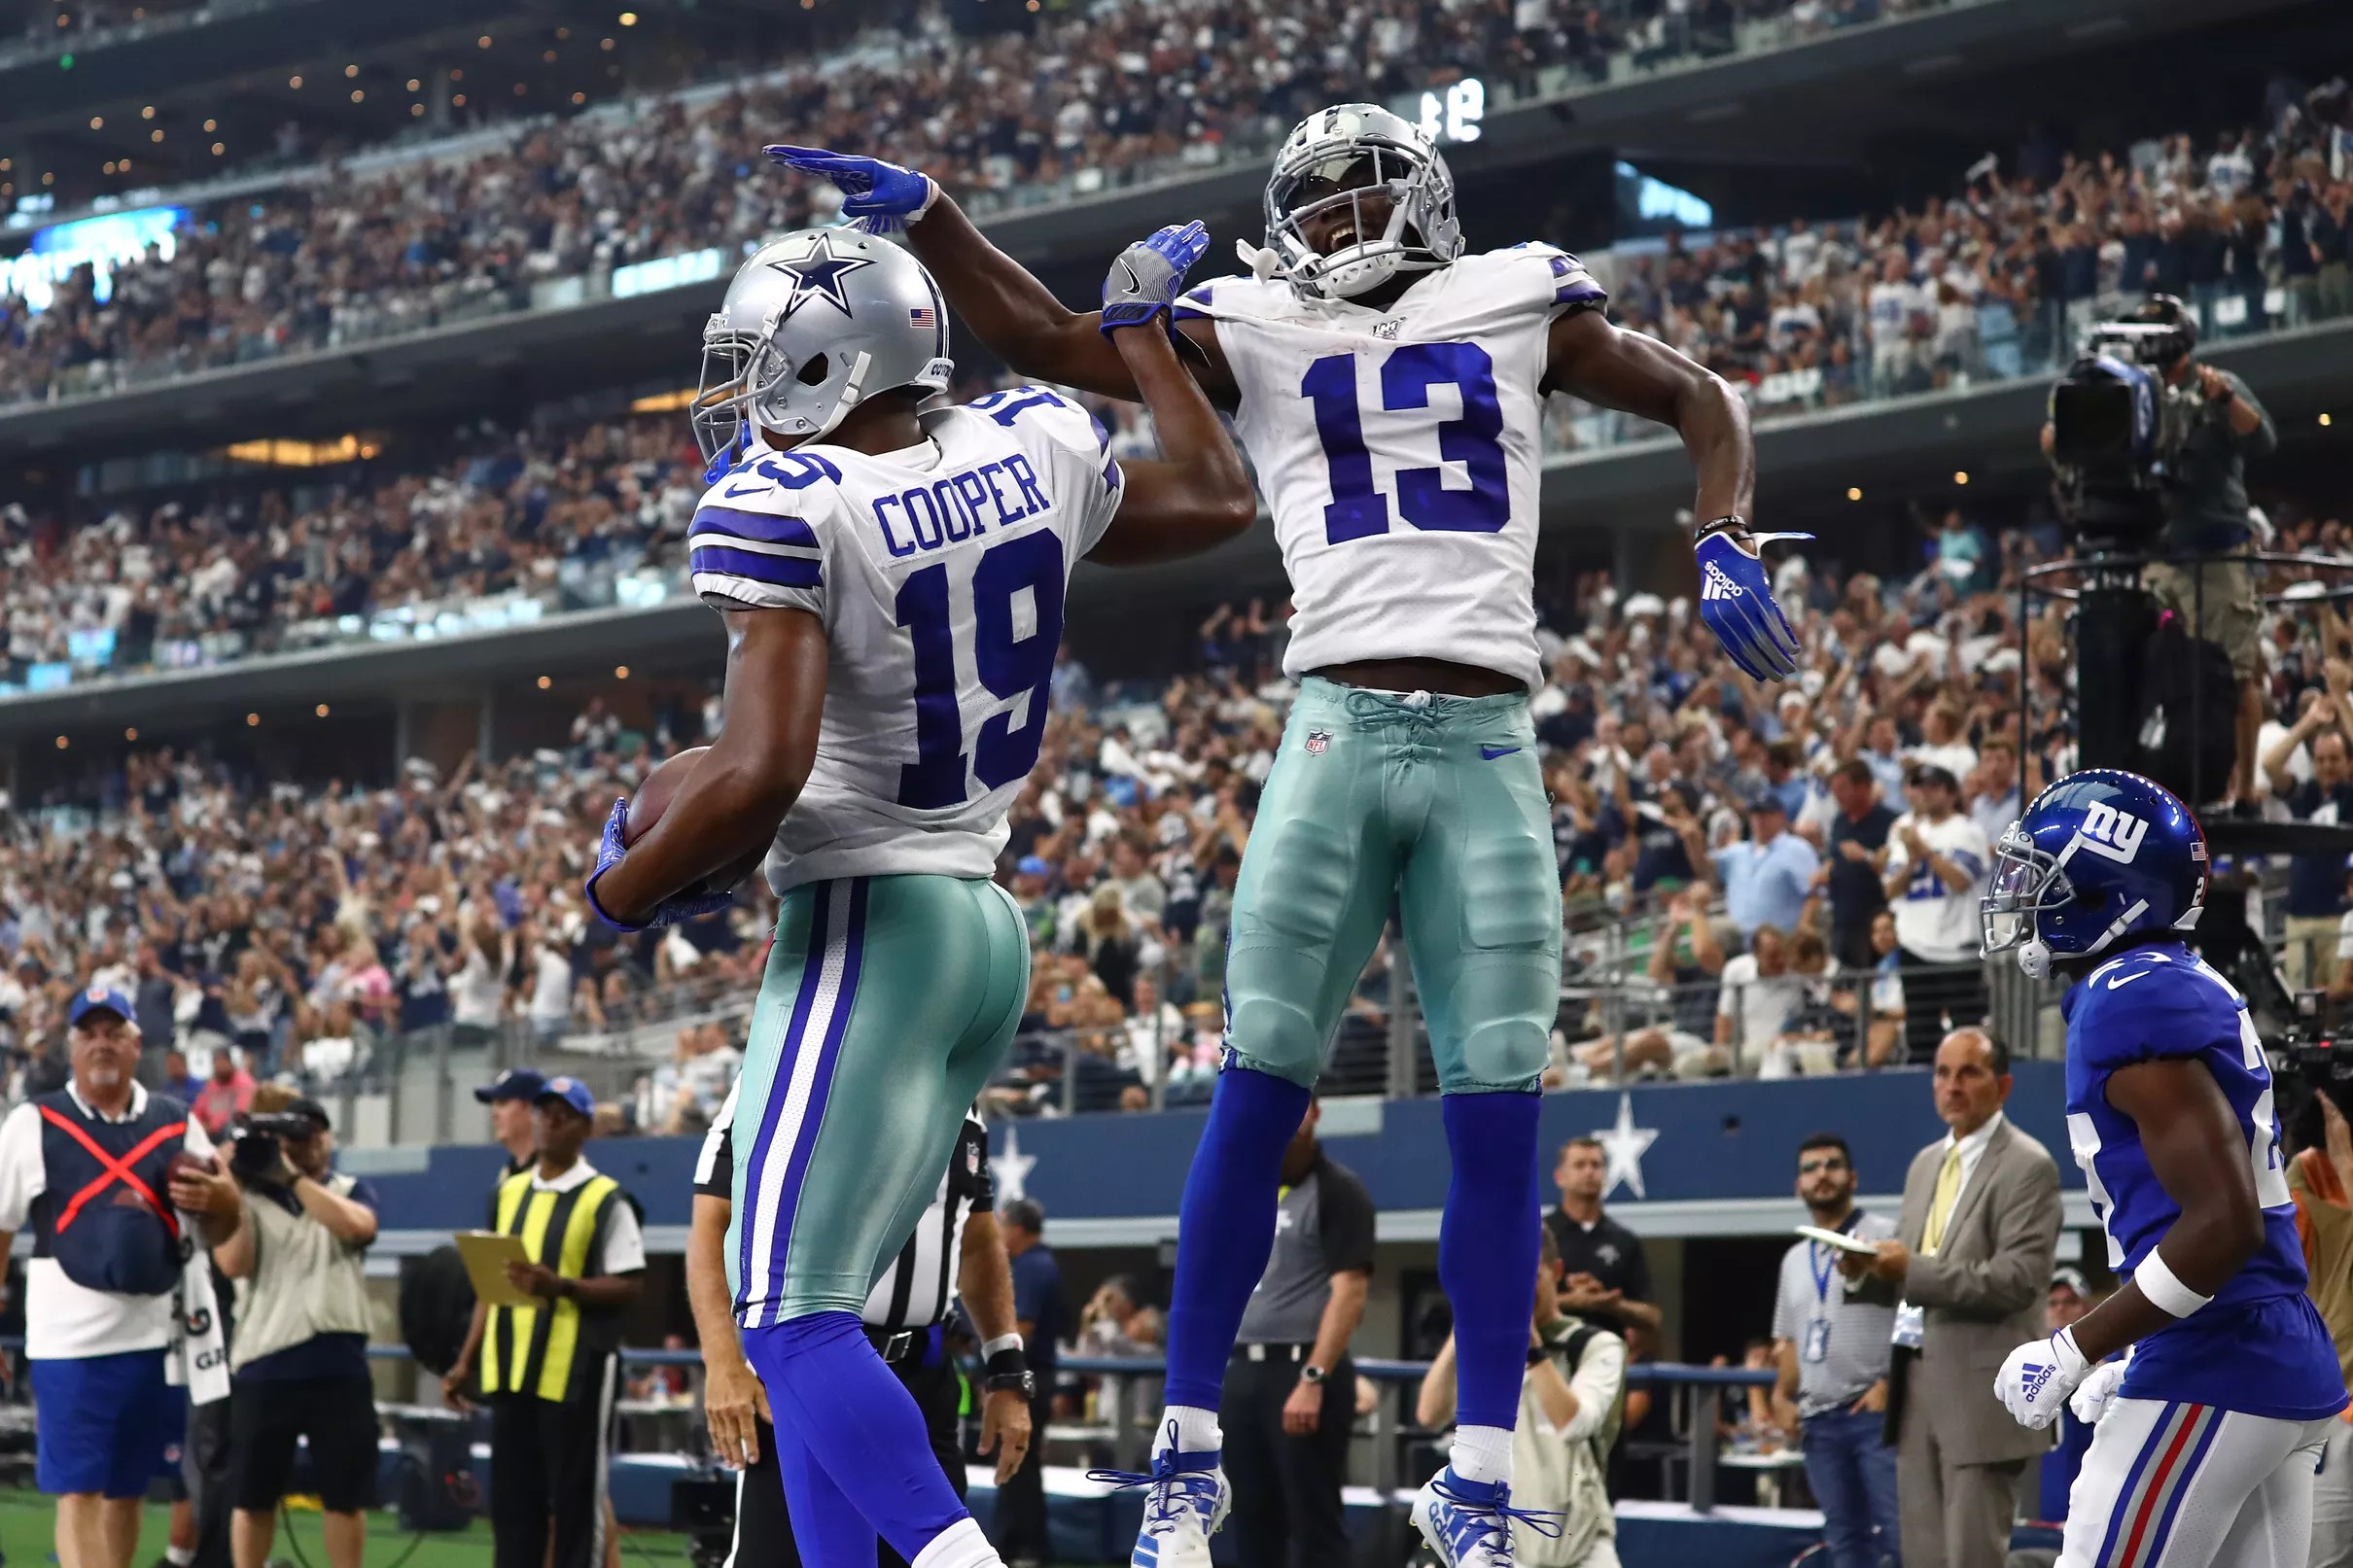 Cowboys have one of the best WR duo’s in the NFL